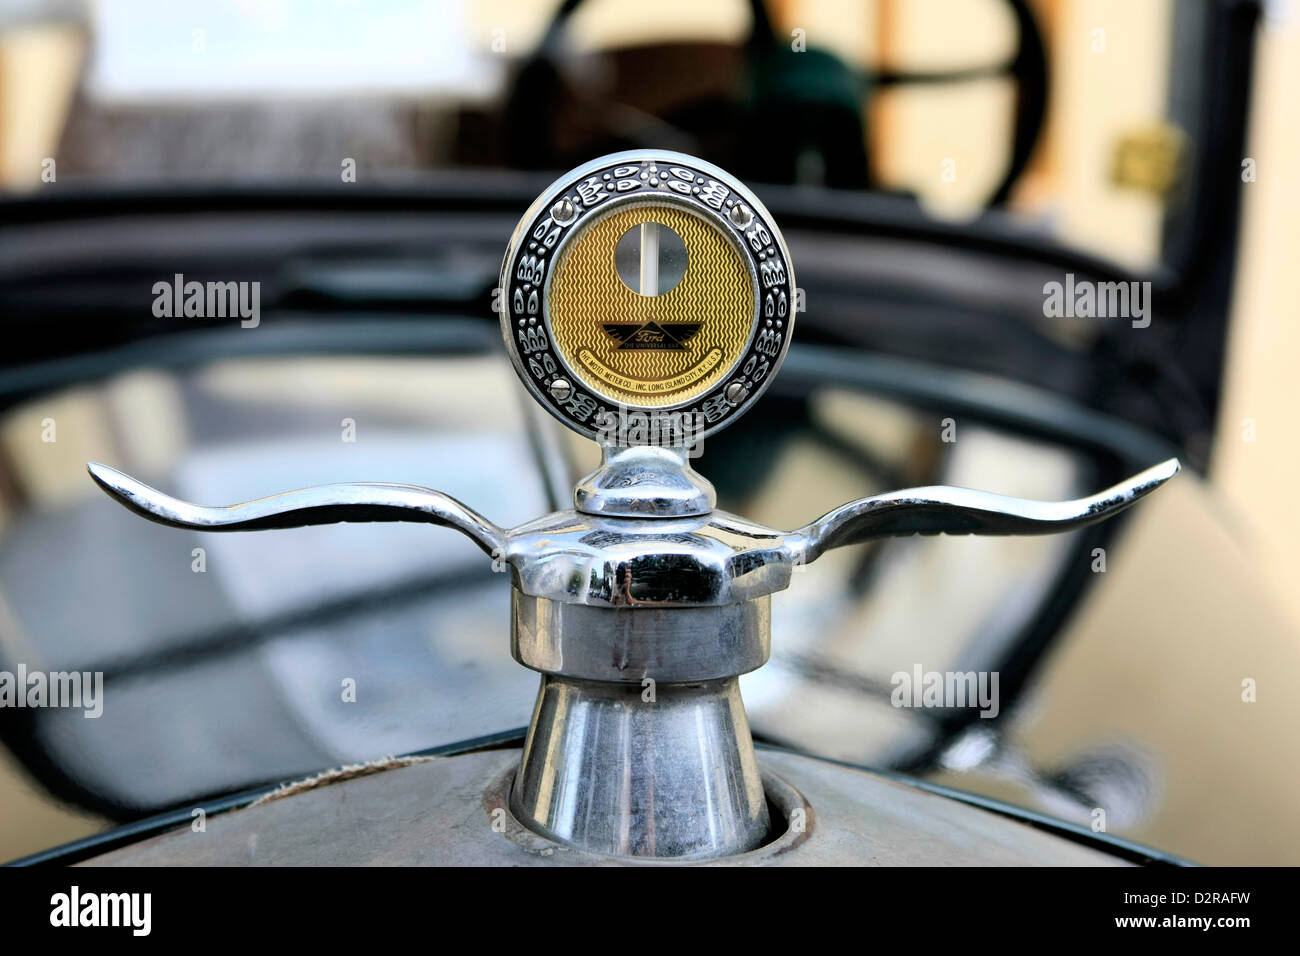 Radiator water thermometer on a 1927 Ford Model T vehicle at the Sarasota Pride and Joy car show in Florida Stock Photo